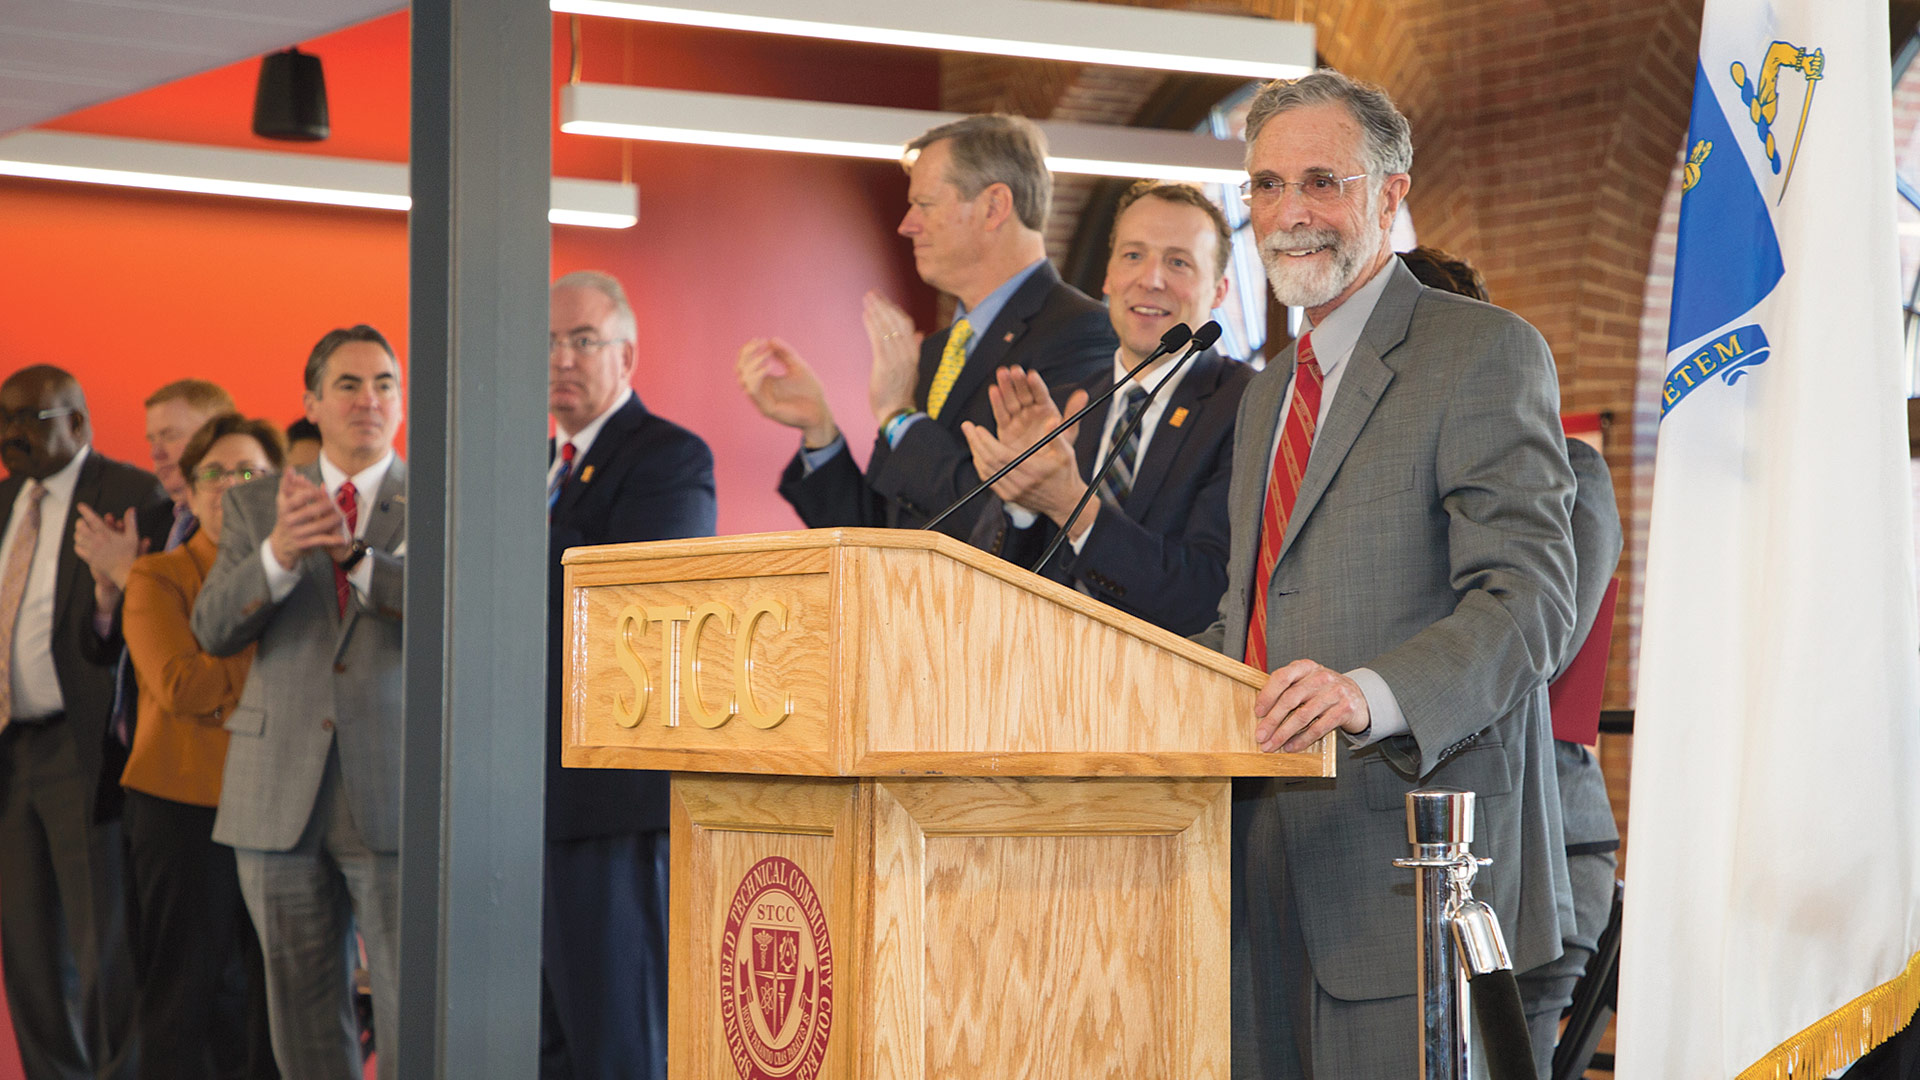 Rubenzahl addresses those gathered for the ceremonies, with Cook and Baker to his right